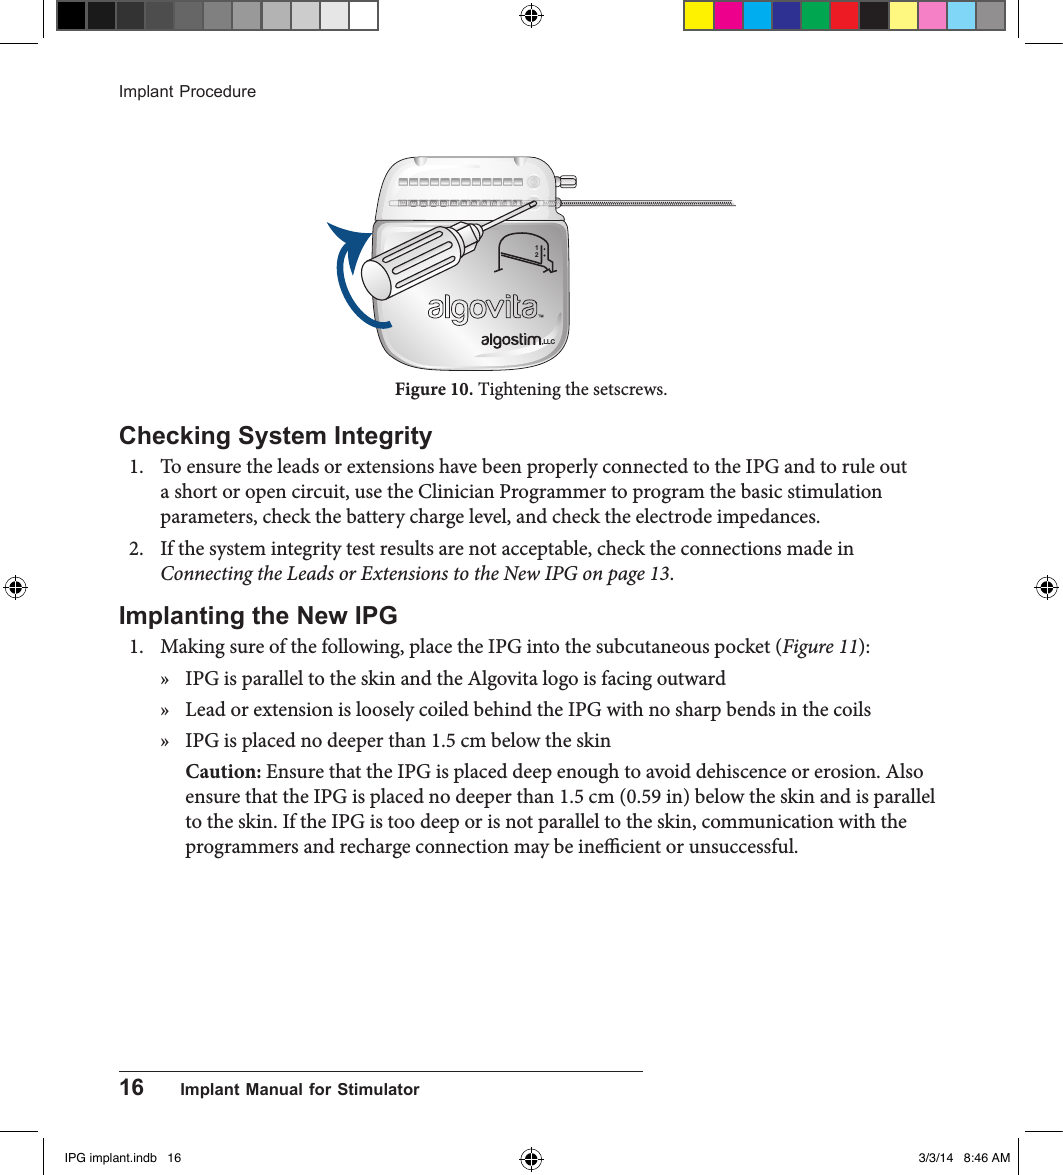 16      Implant Manual for StimulatorImplant Procedure12,LLCFigure 10. Tightening the setscrews.Checking System Integrity 1.  To ensure the leads or extensions have been properly connected to the IPG and to rule out a short or open circuit, use the Clinician Programmer to program the basic stimulation parameters, check the battery charge level, and check the electrode impedances.2.  If the system integrity test results are not acceptable, check the connections made in Connecting the Leads or Extensions to the New IPG on page 13.Implanting the New IPG1.  Making sure of the following, place the IPG into the subcutaneous pocket (Figure 11):  » IPG is parallel to the skin and the Algovita logo is facing outward  » Lead or extension is loosely coiled behind the IPG with no sharp bends in the coils » IPG is placed no deeper than 1.5 cm below the skinCaution: Ensure that the IPG is placed deep enough to avoid dehiscence or erosion. Also ensure that the IPG is placed no deeper than 1.5 cm (0.59 in) below the skin and is parallel to the skin. If the IPG is too deep or is not parallel to the skin, communication with the programmers and recharge connection may be inecient or unsuccessful.IPG implant.indb   16 3/3/14   8:46 AM